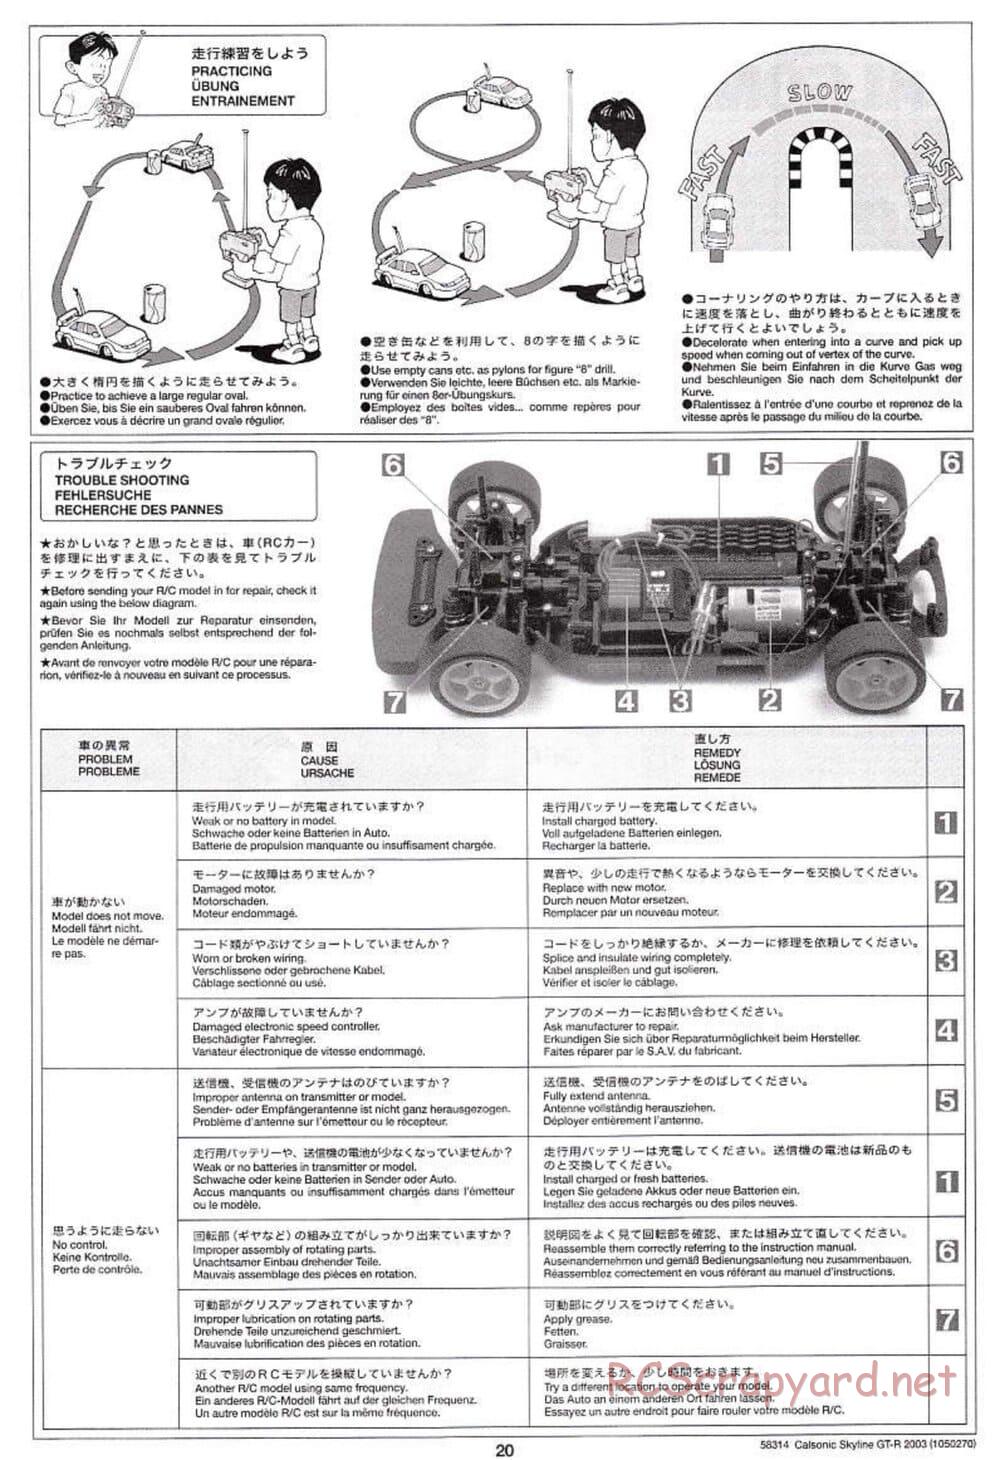 Tamiya - Calsonic Skyline GT-R 2003 - TT-01 Chassis - Manual - Page 20